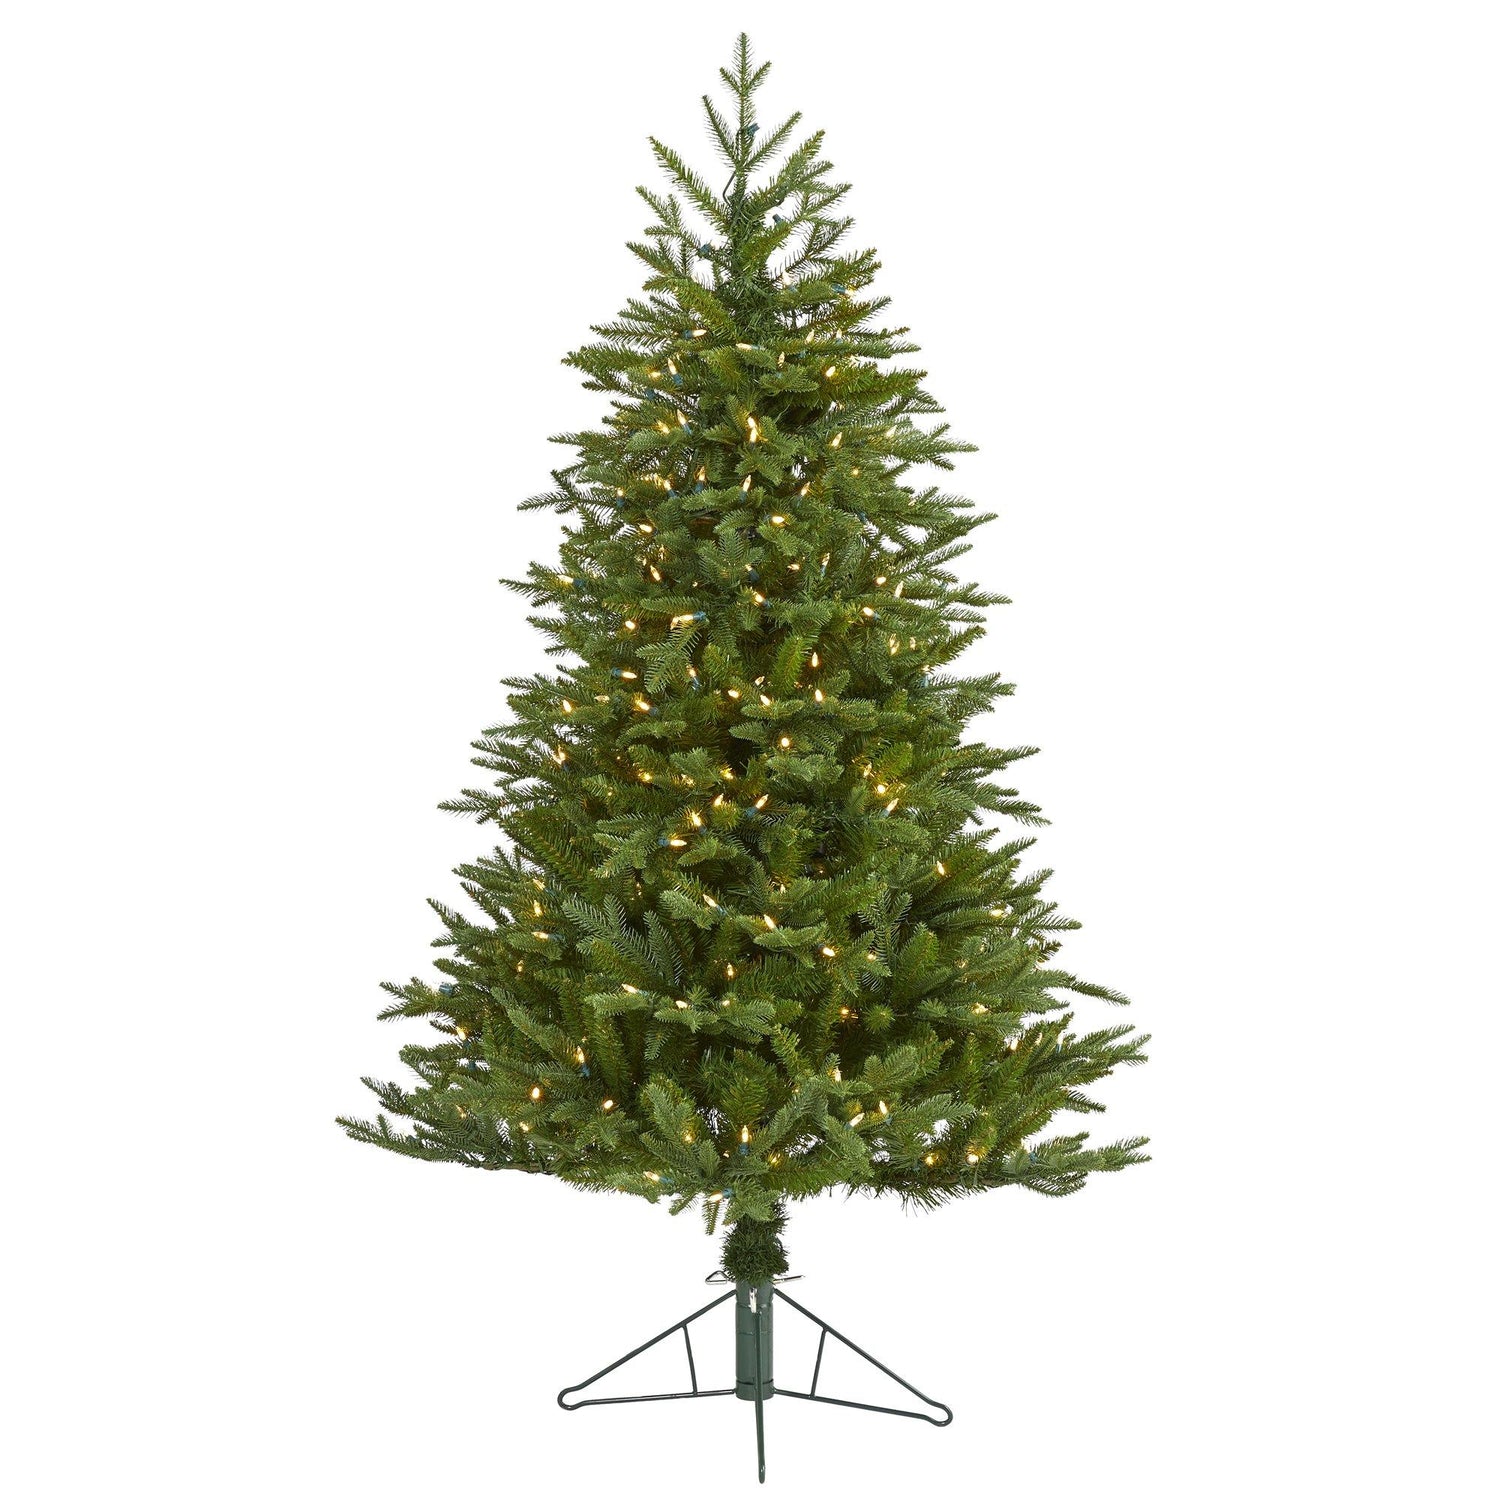 5' Cambridge Fir Artificial Christmas Tree with 300 Clear Warm (Multifunction) LED Lights with Instant Connect Technology and 570 Bendable Branches